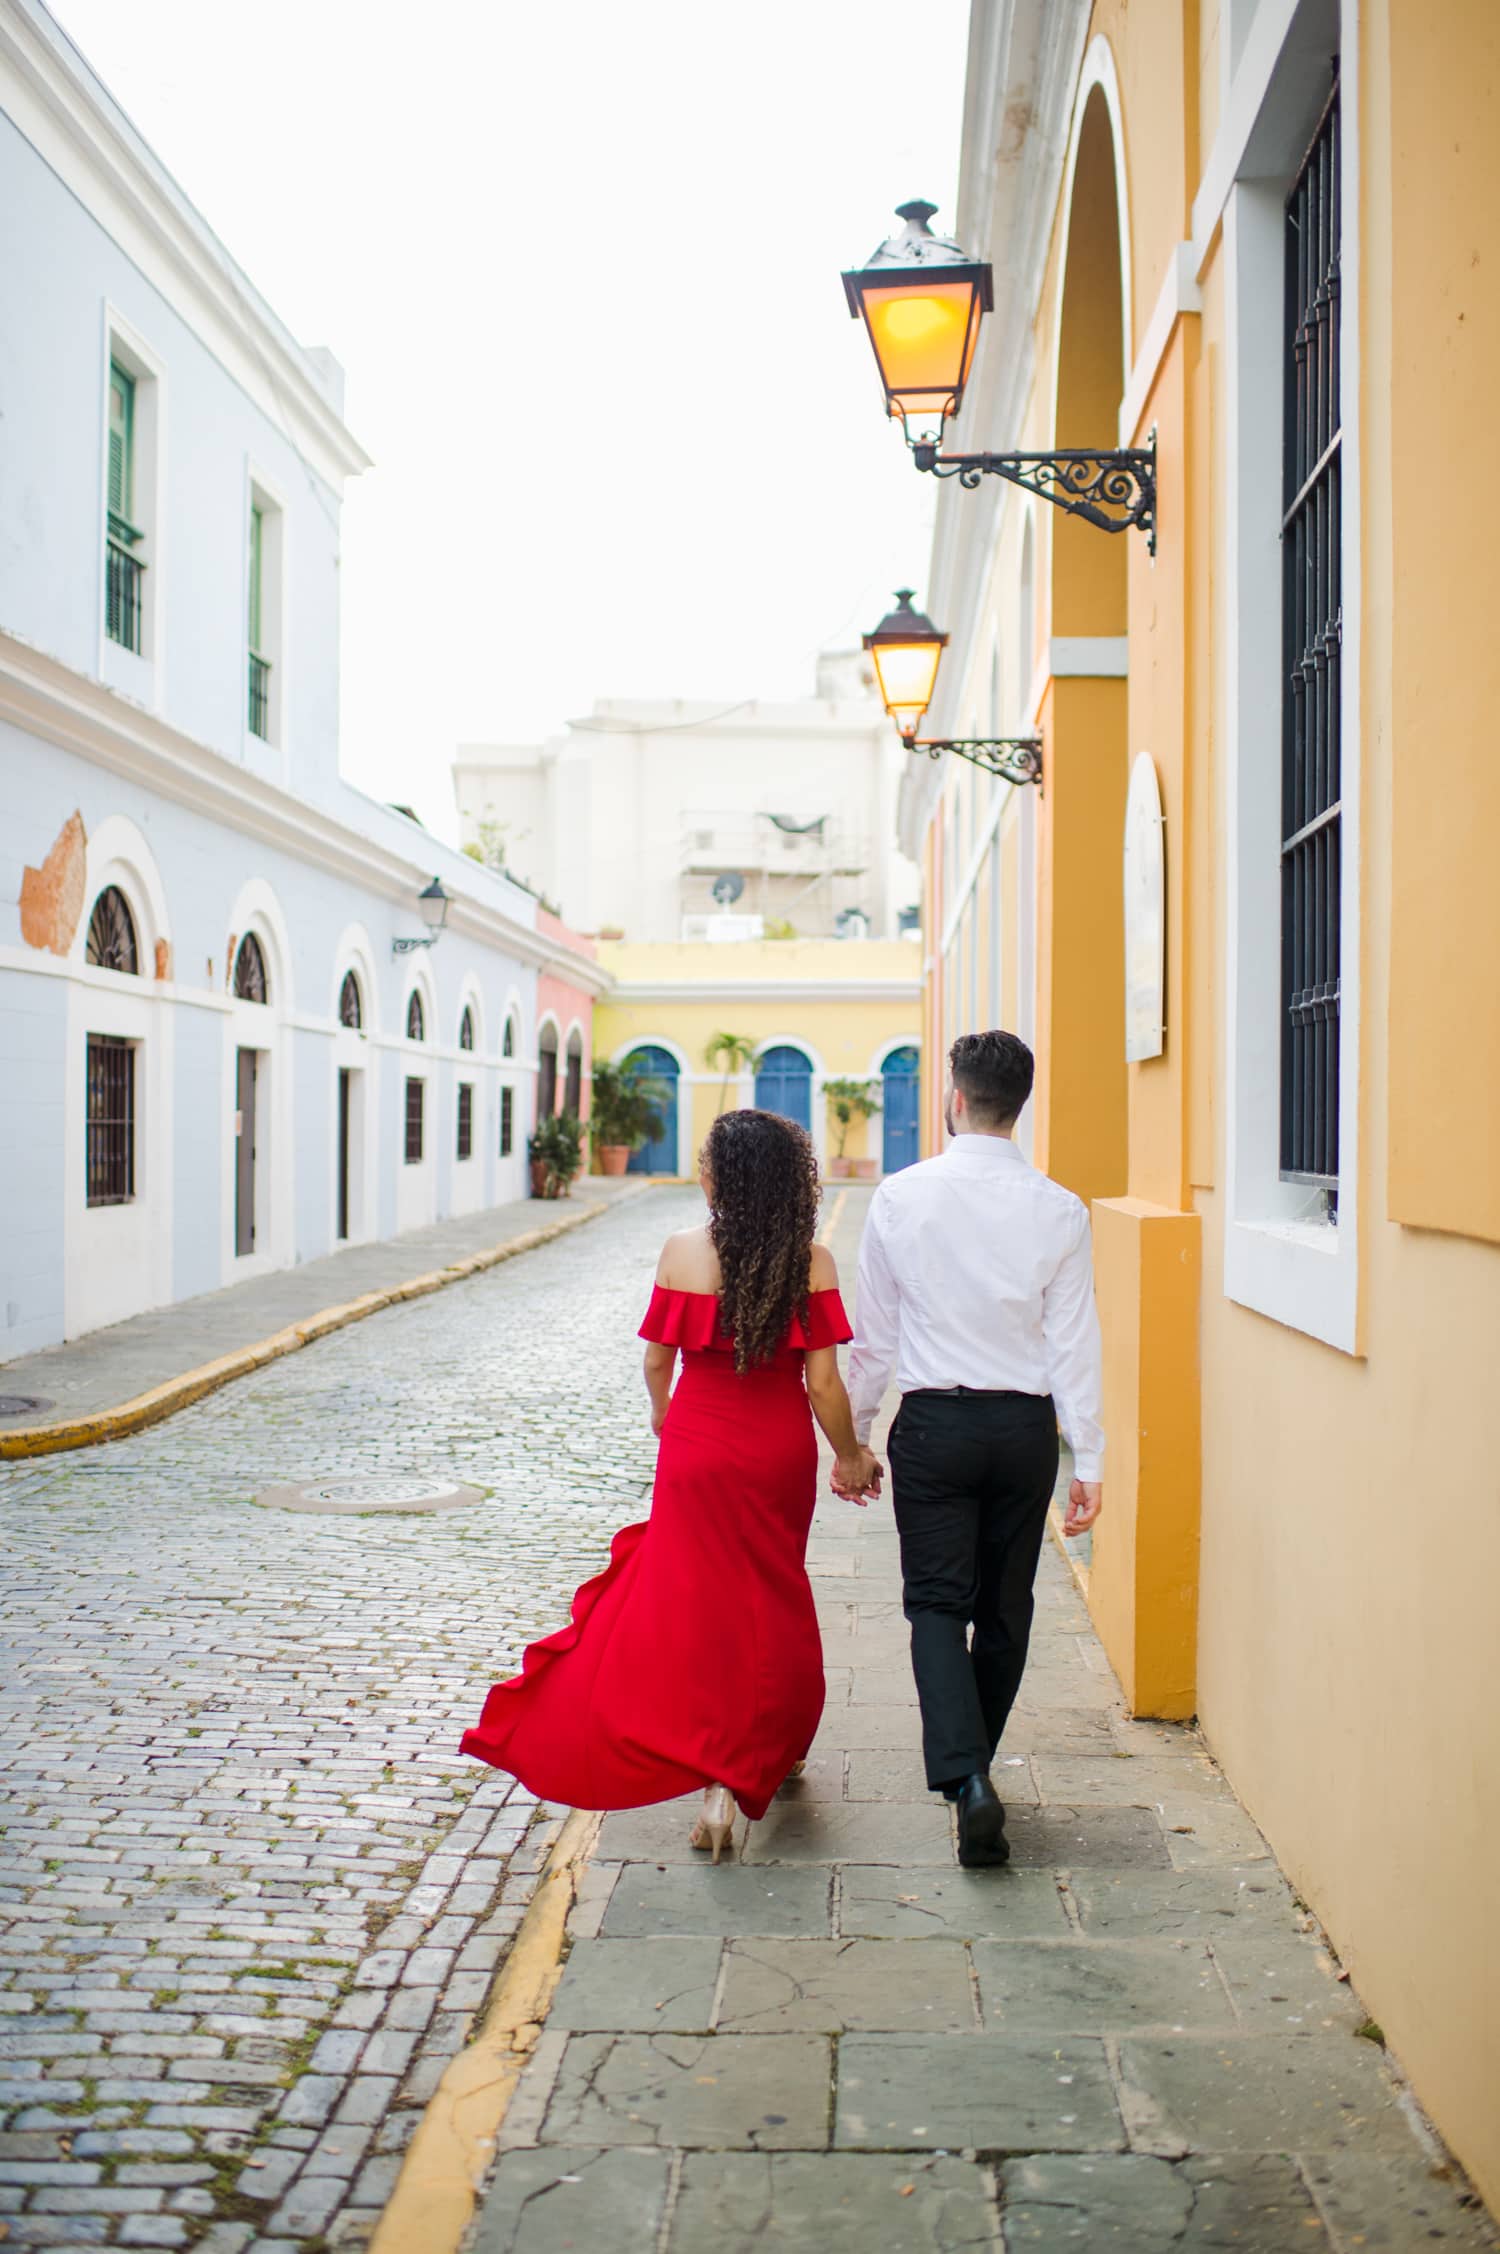 Engagement portraits at Old San Juan by Puerto Rico wedding photographer Camille Fontz